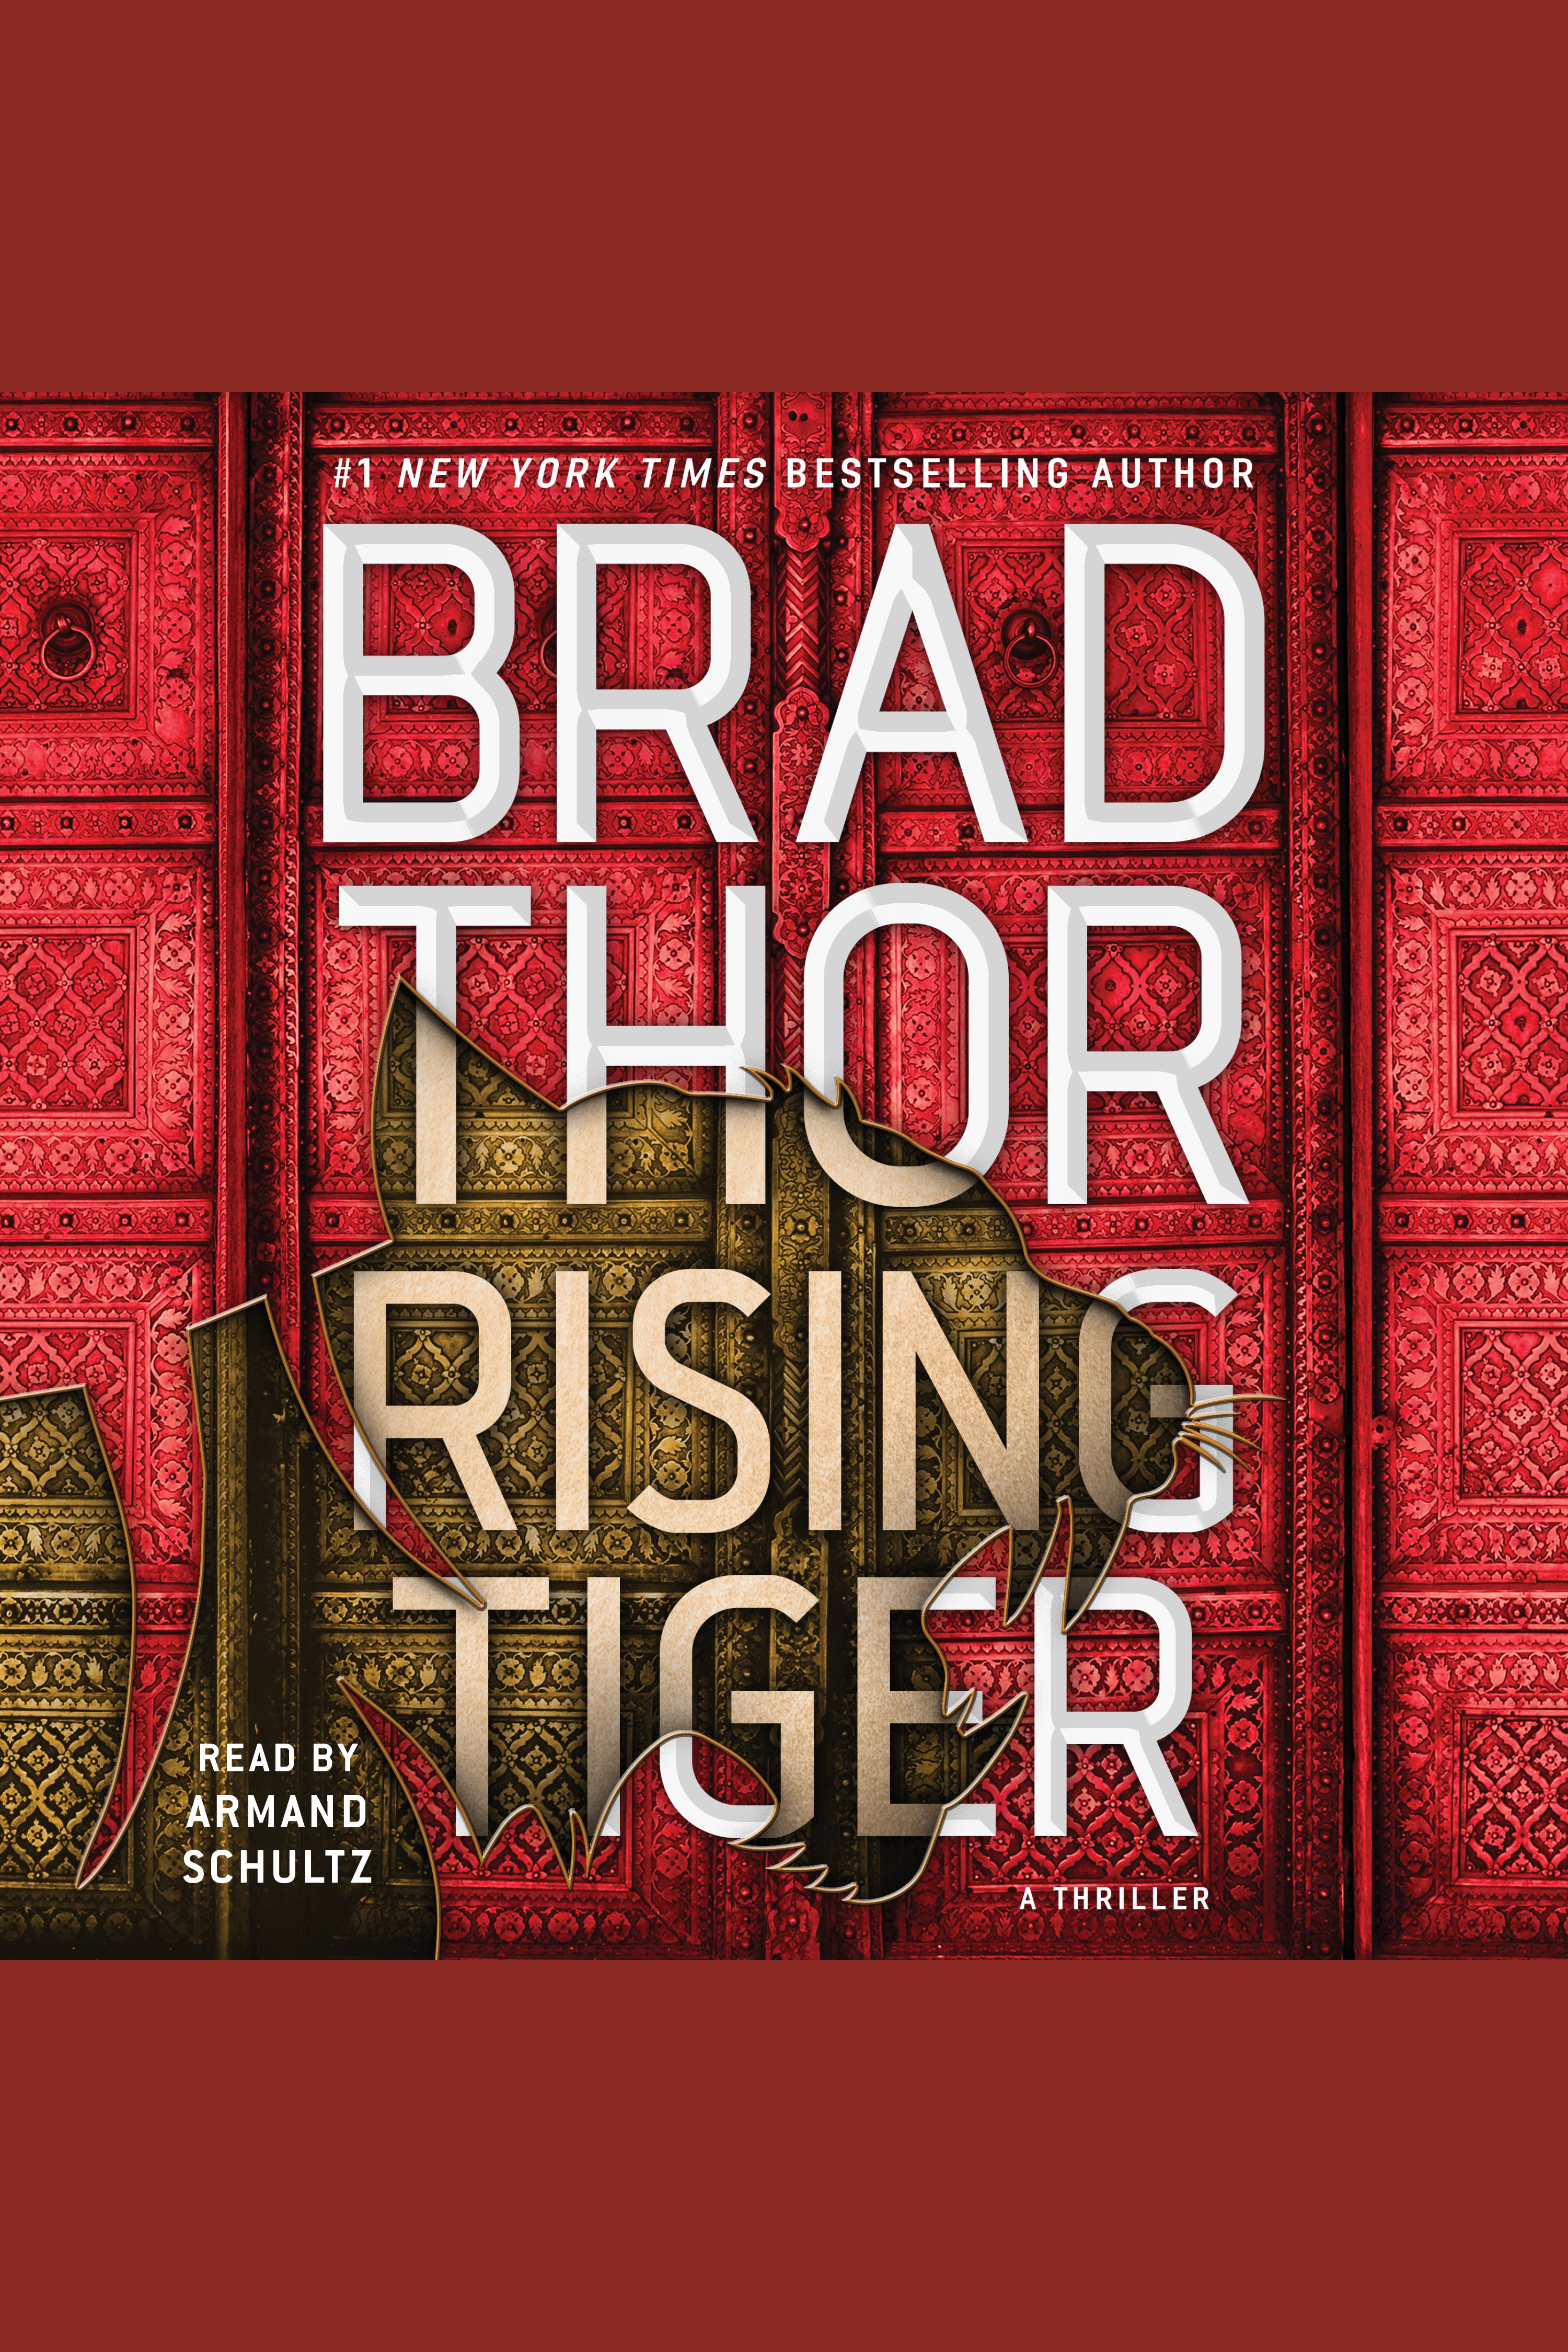 Rising Tiger A Thriller cover image